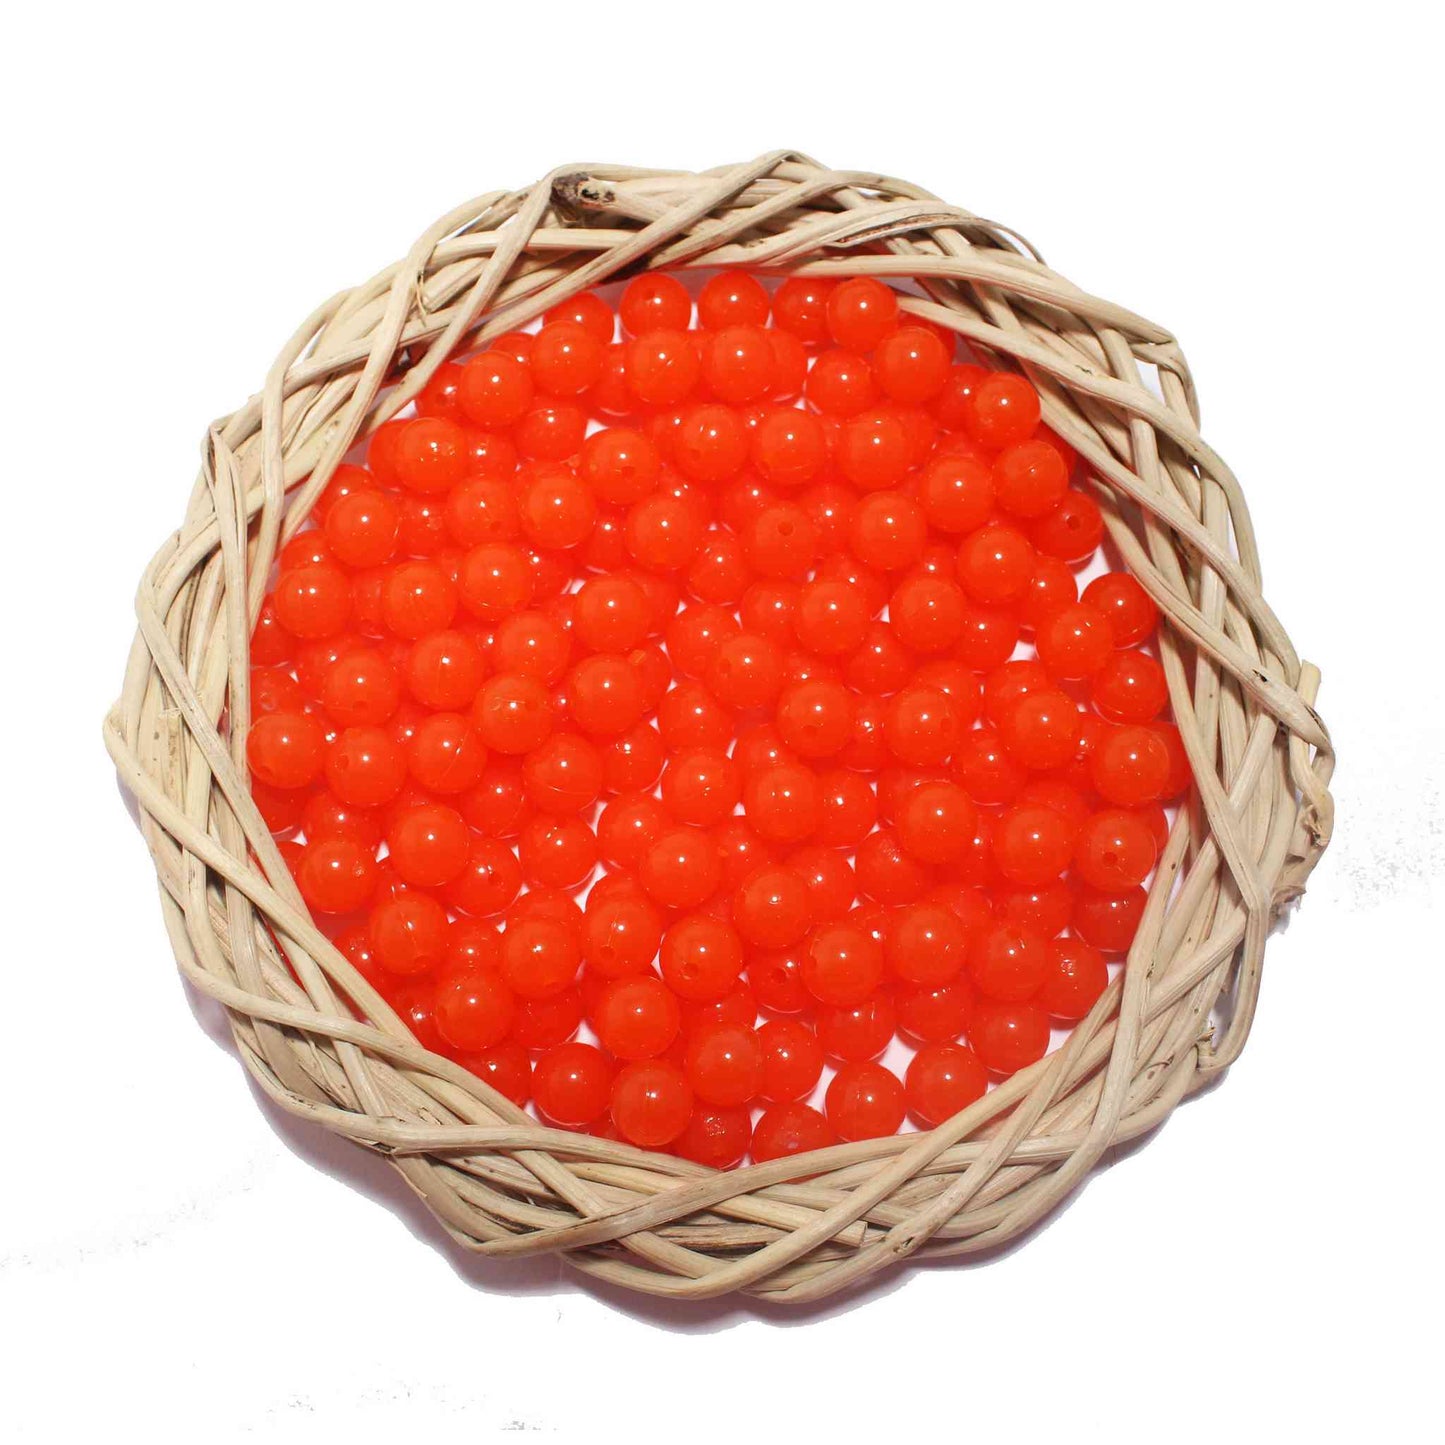 Indian Petals Premium quality Round Glass Beads for DIY Craft, Trousseau Packing or Decoration - Design 734, Tomato - Indian Petals